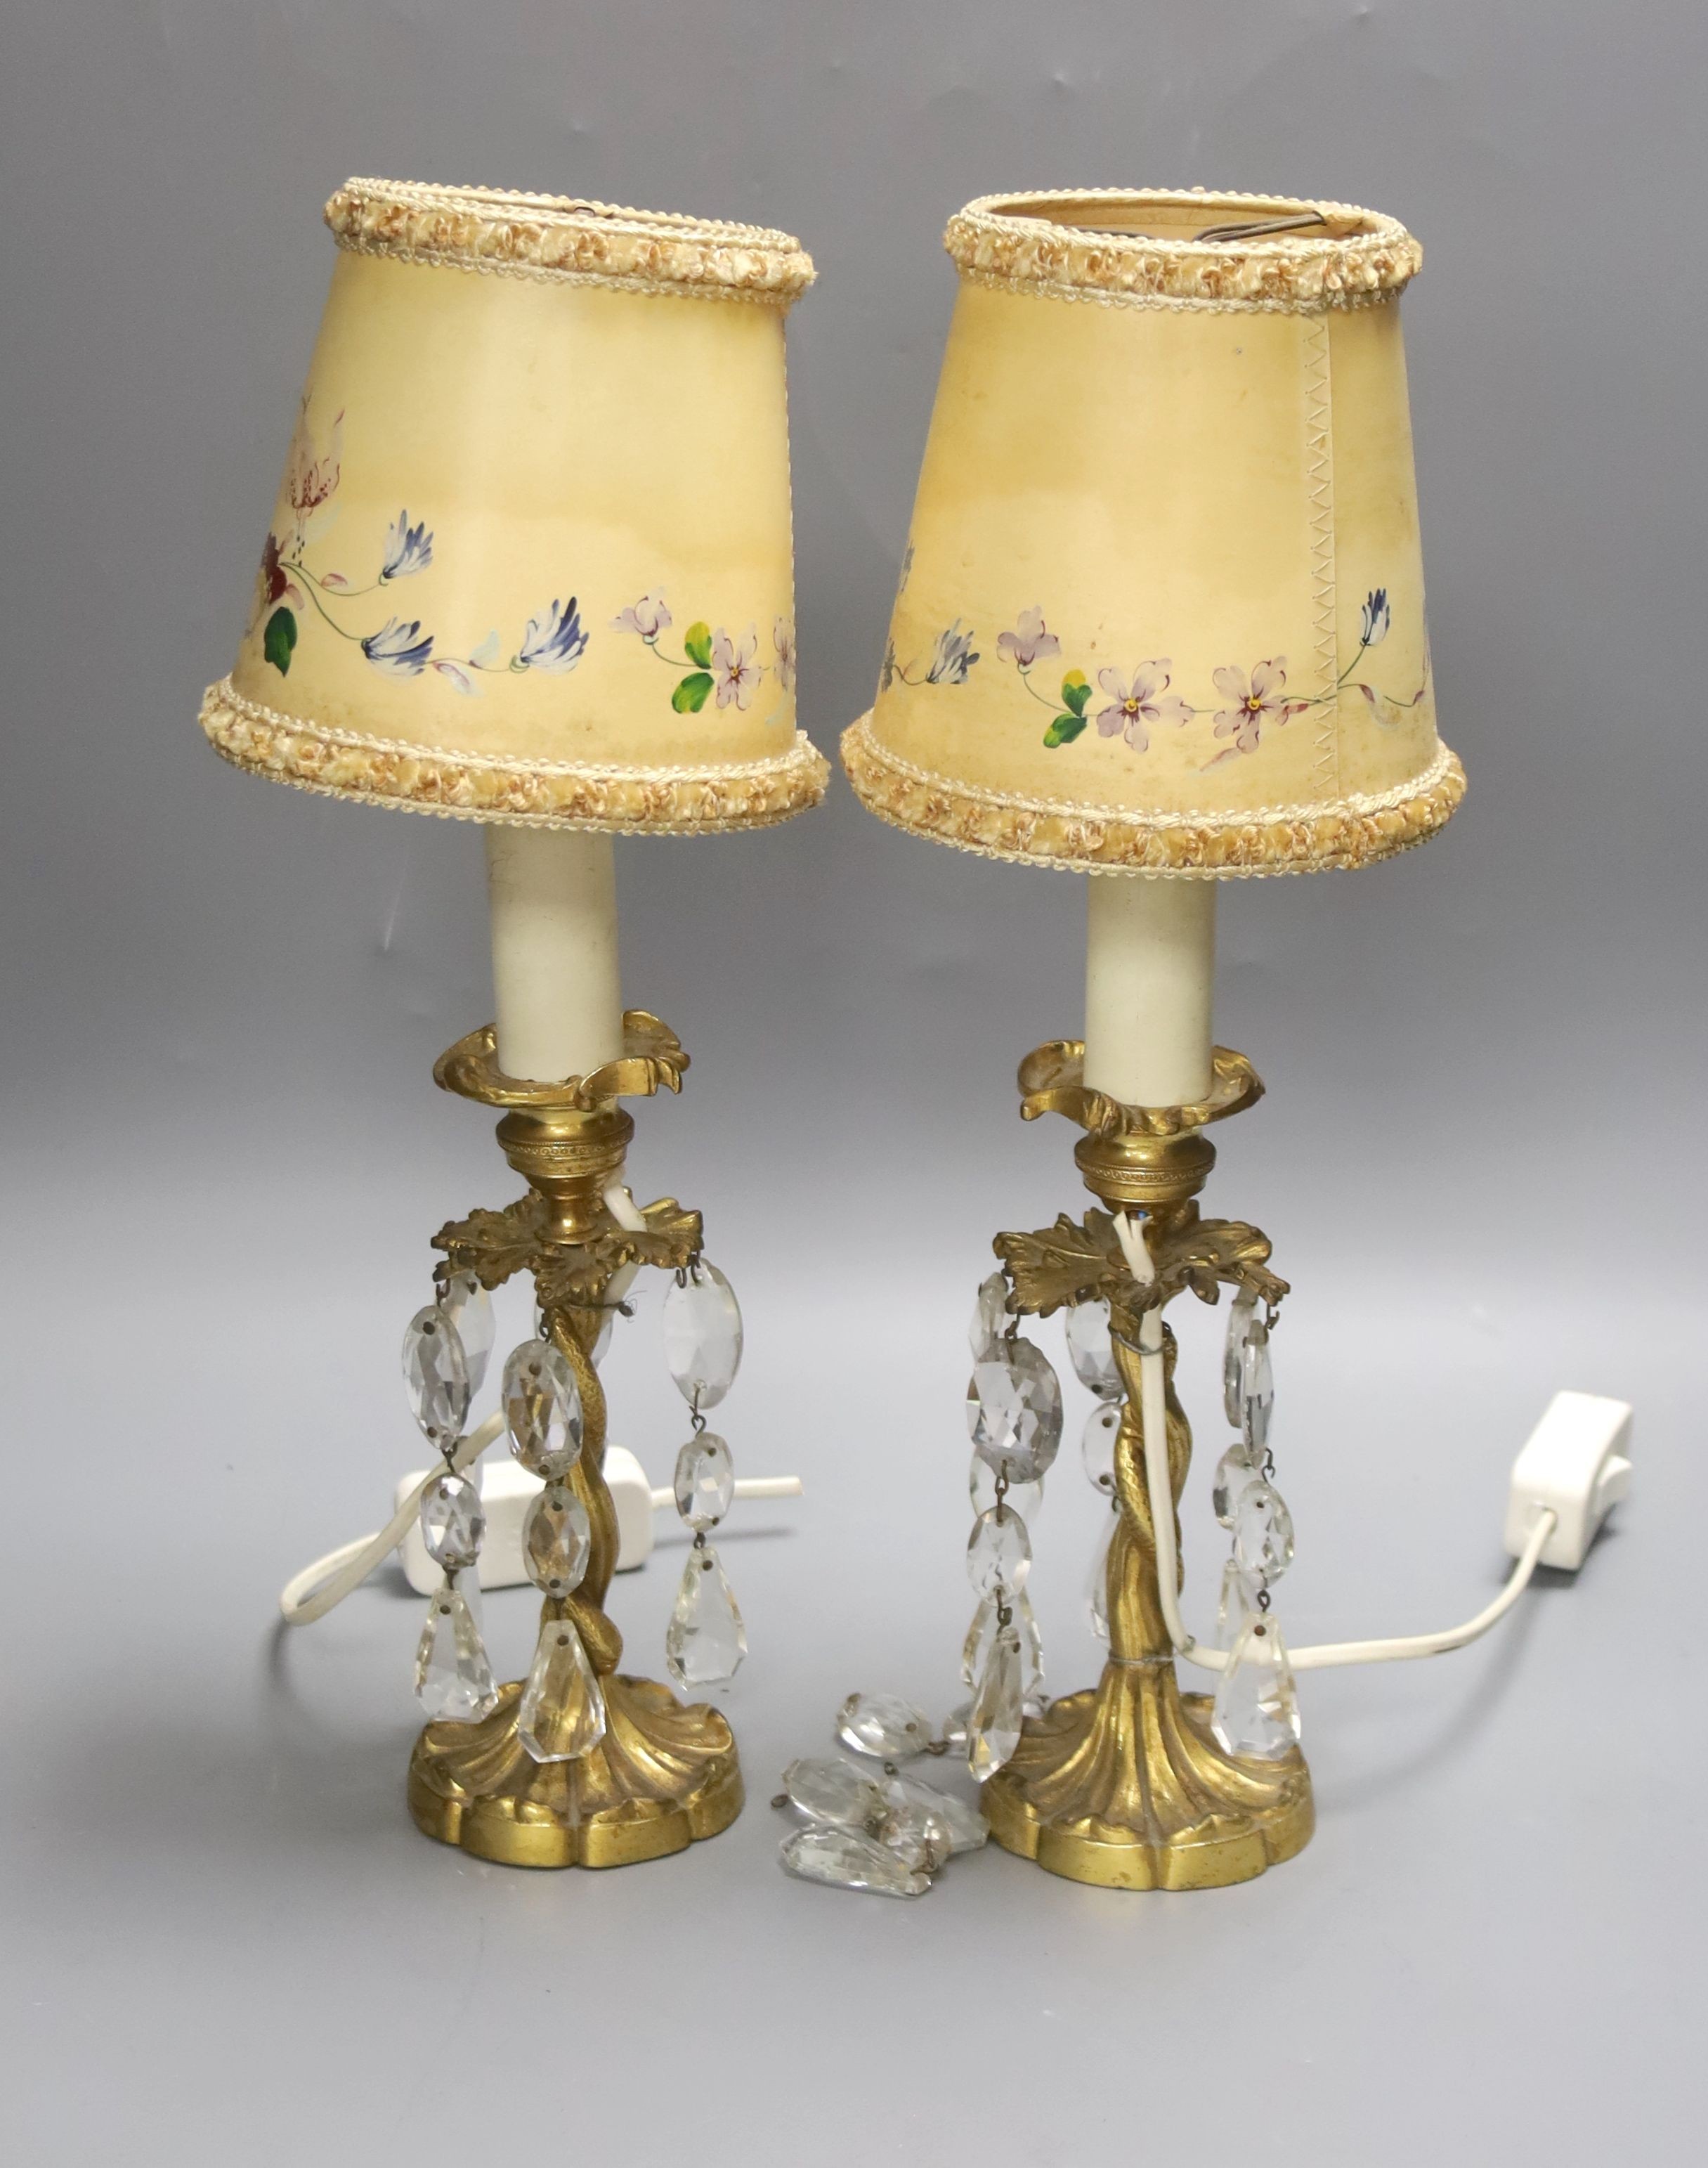 A pair of ormolu table lamps with cut crystal decoration 19cm excluding fittings